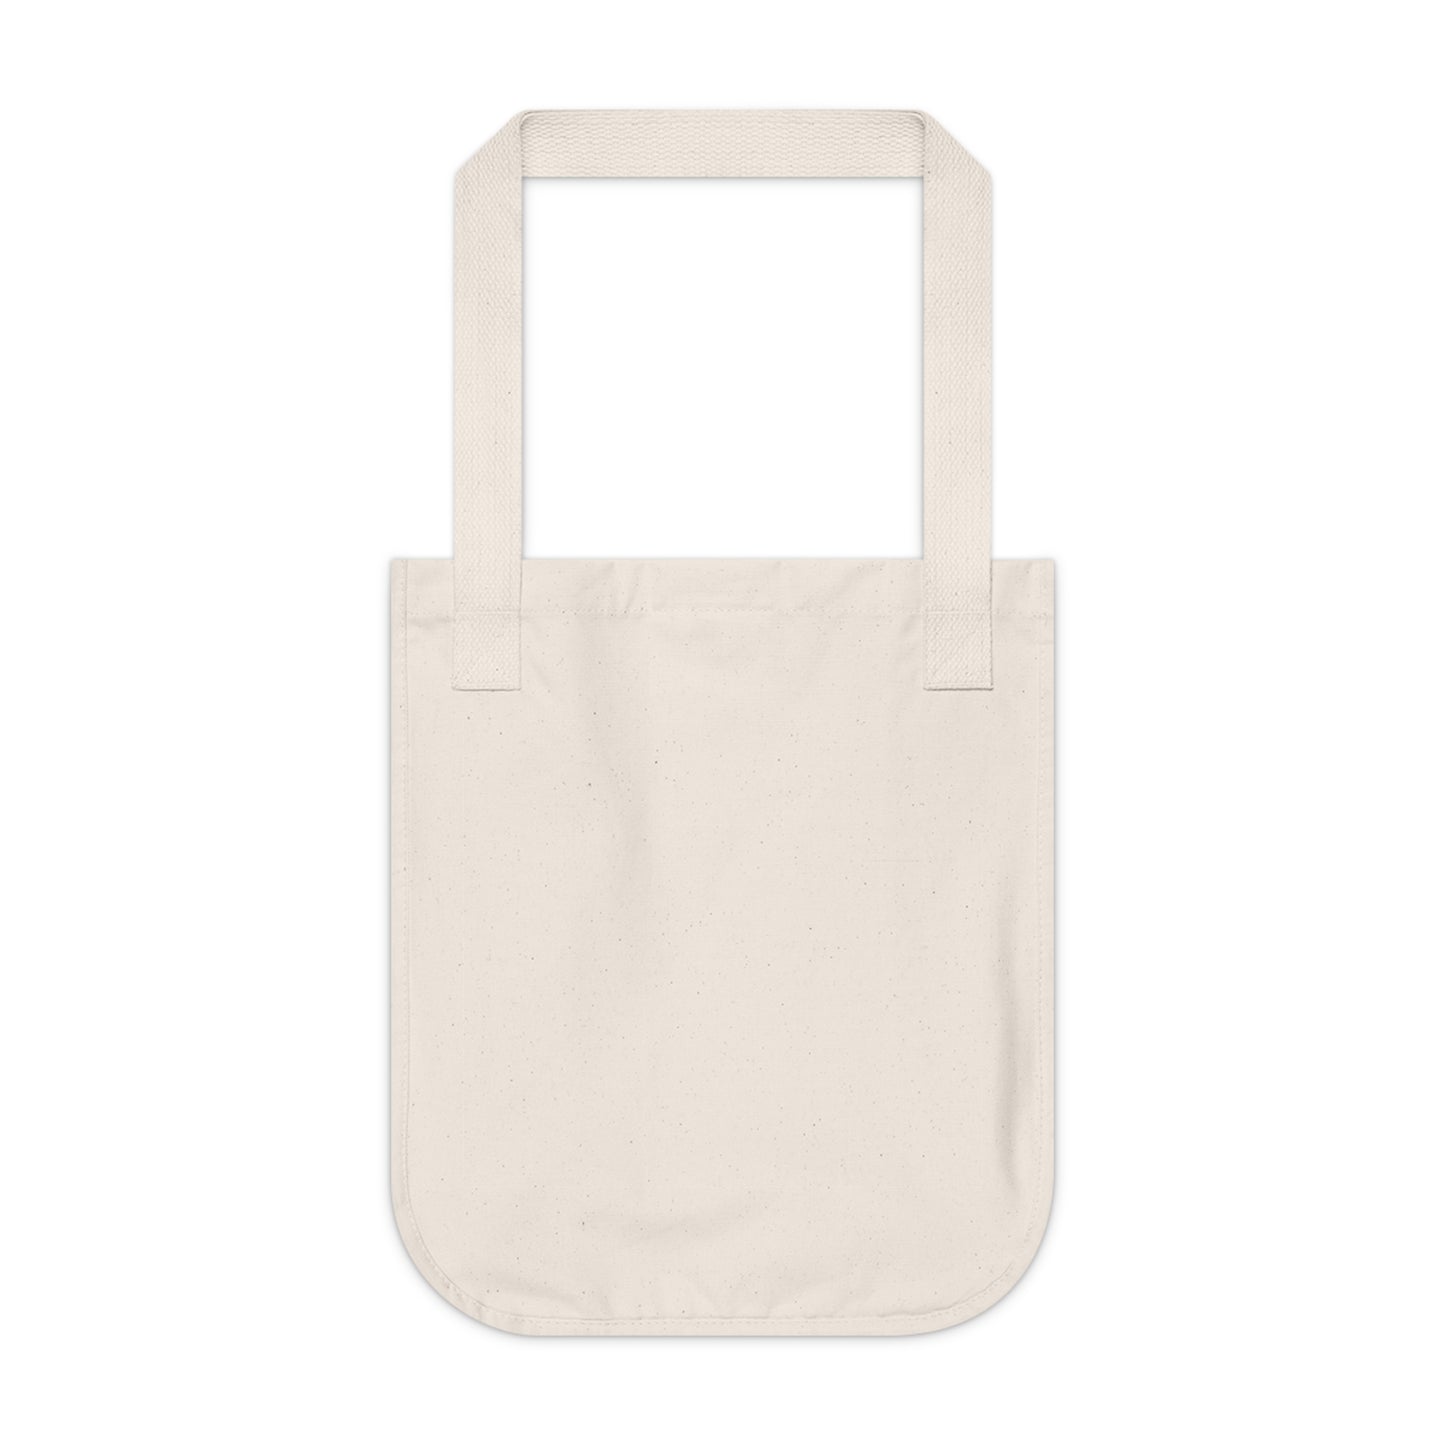 "Illuminating the Ordinary: A Vision of the Familiar in Light and Form" - Bam Boo! Lifestyle Eco-friendly Tote Bag